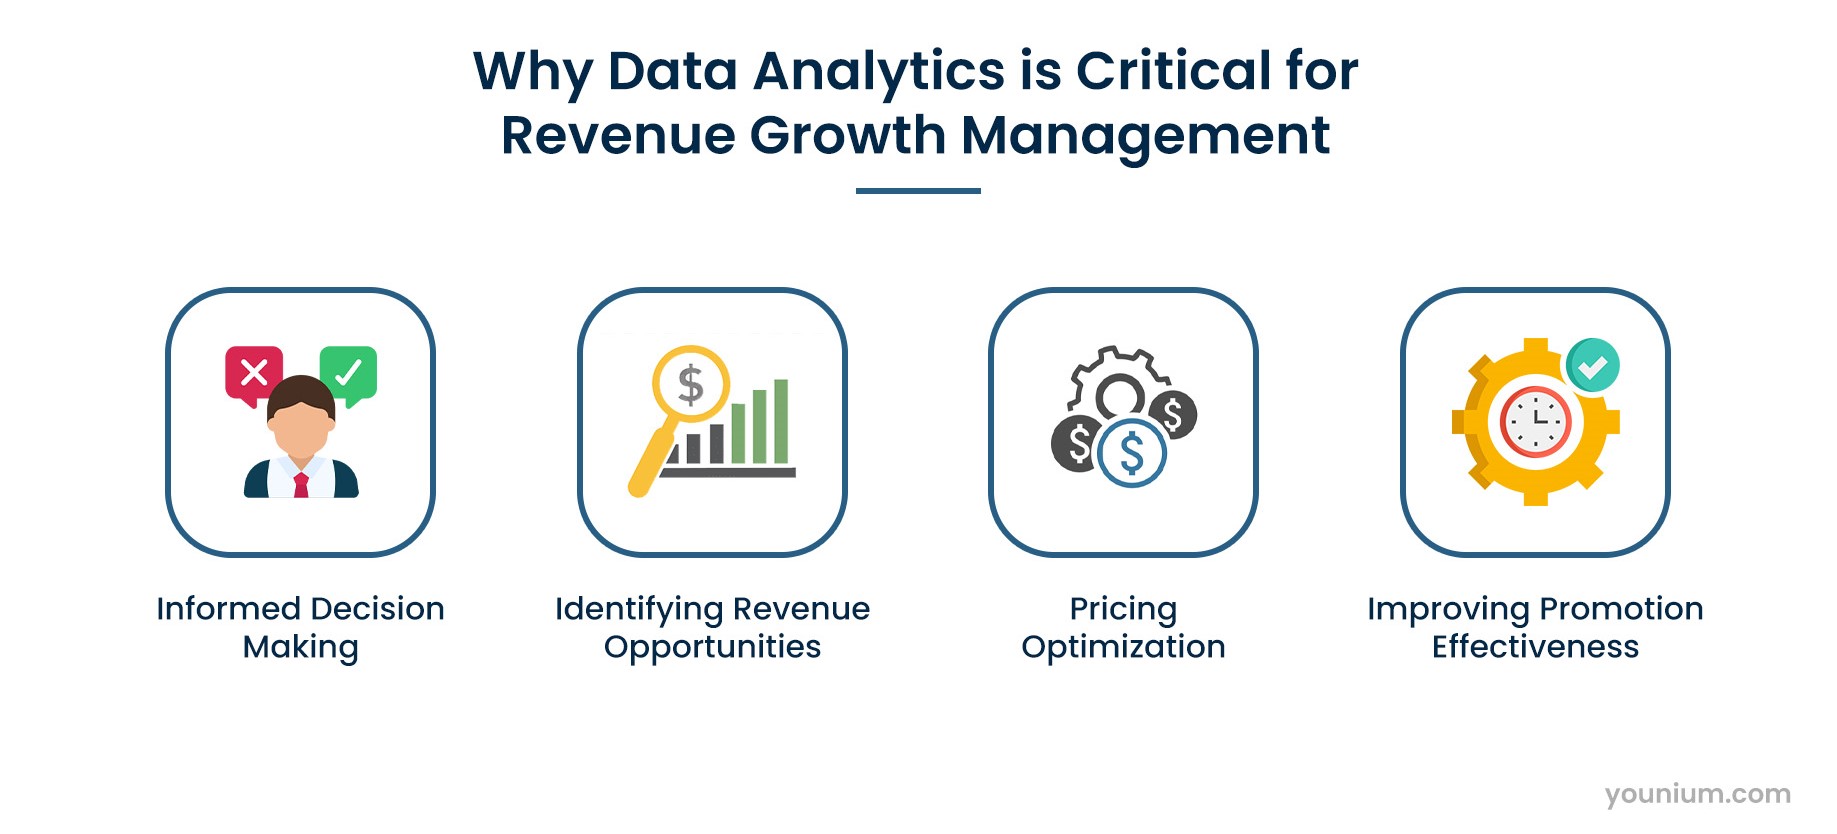 Why Data Analytics is Critical for